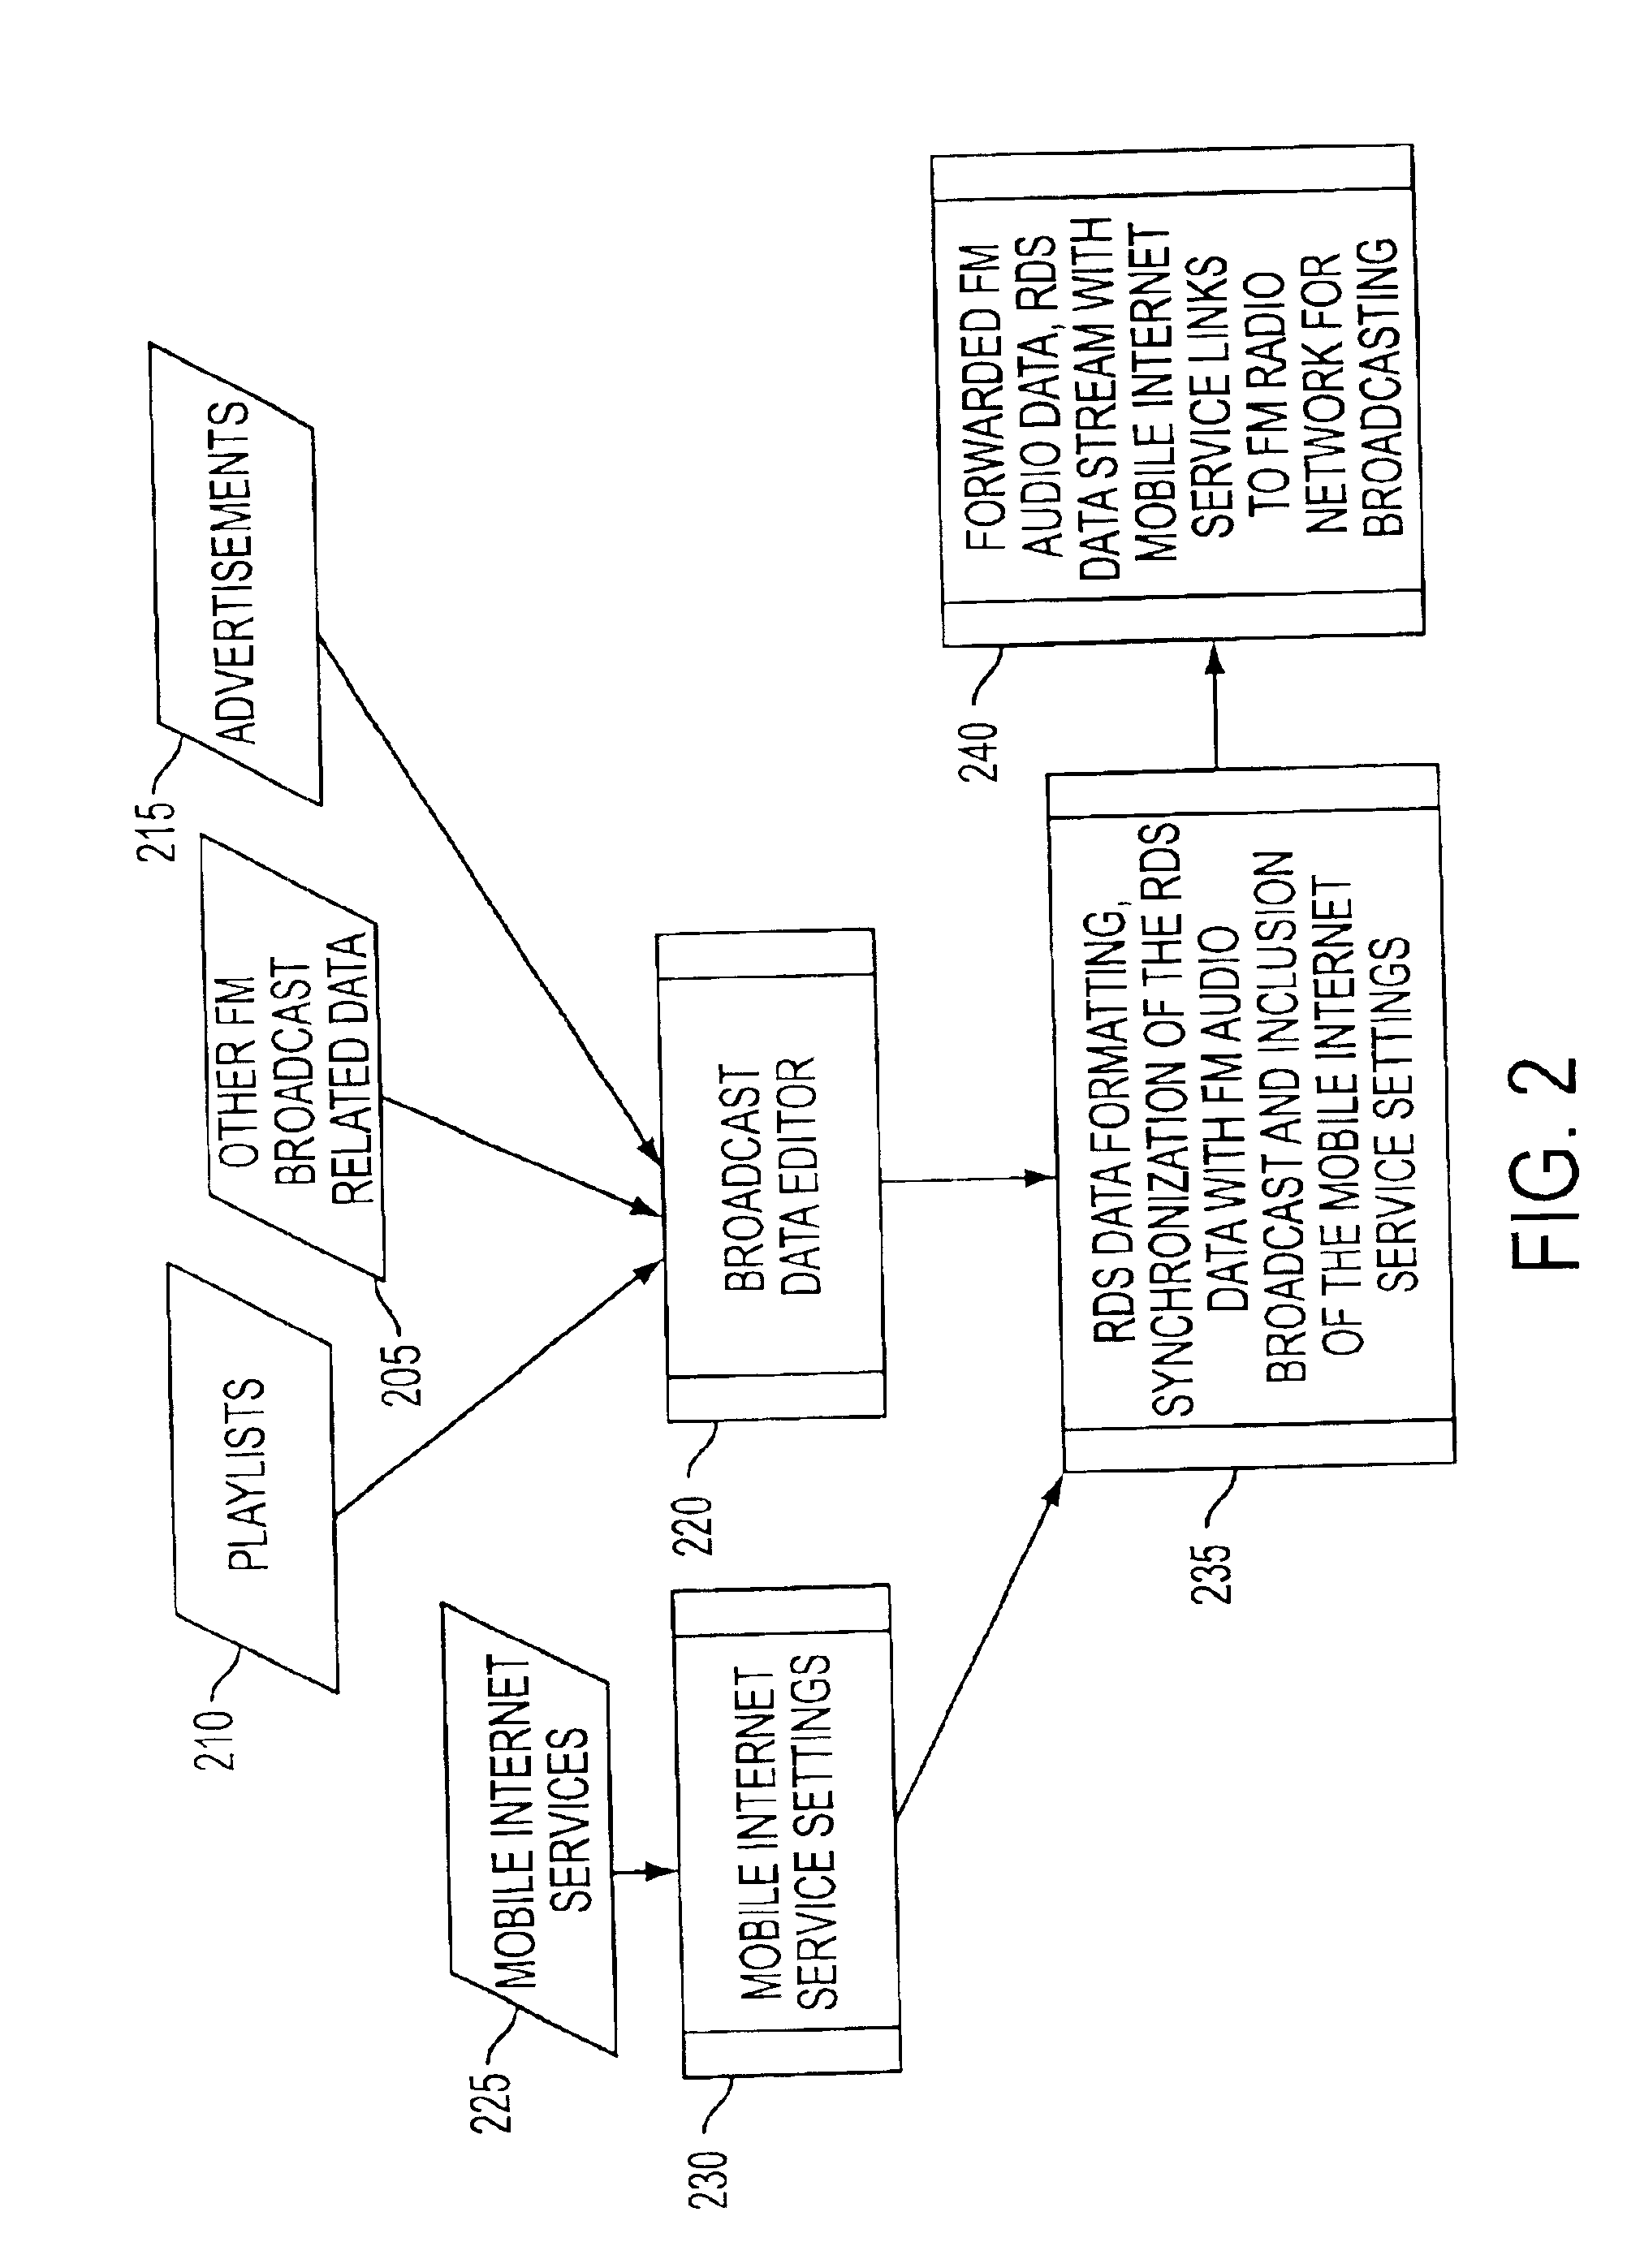 Two channel communication system based on RDS datastream broadcasting and the integration of digital mobile terminal and VHF/FM radio receiver